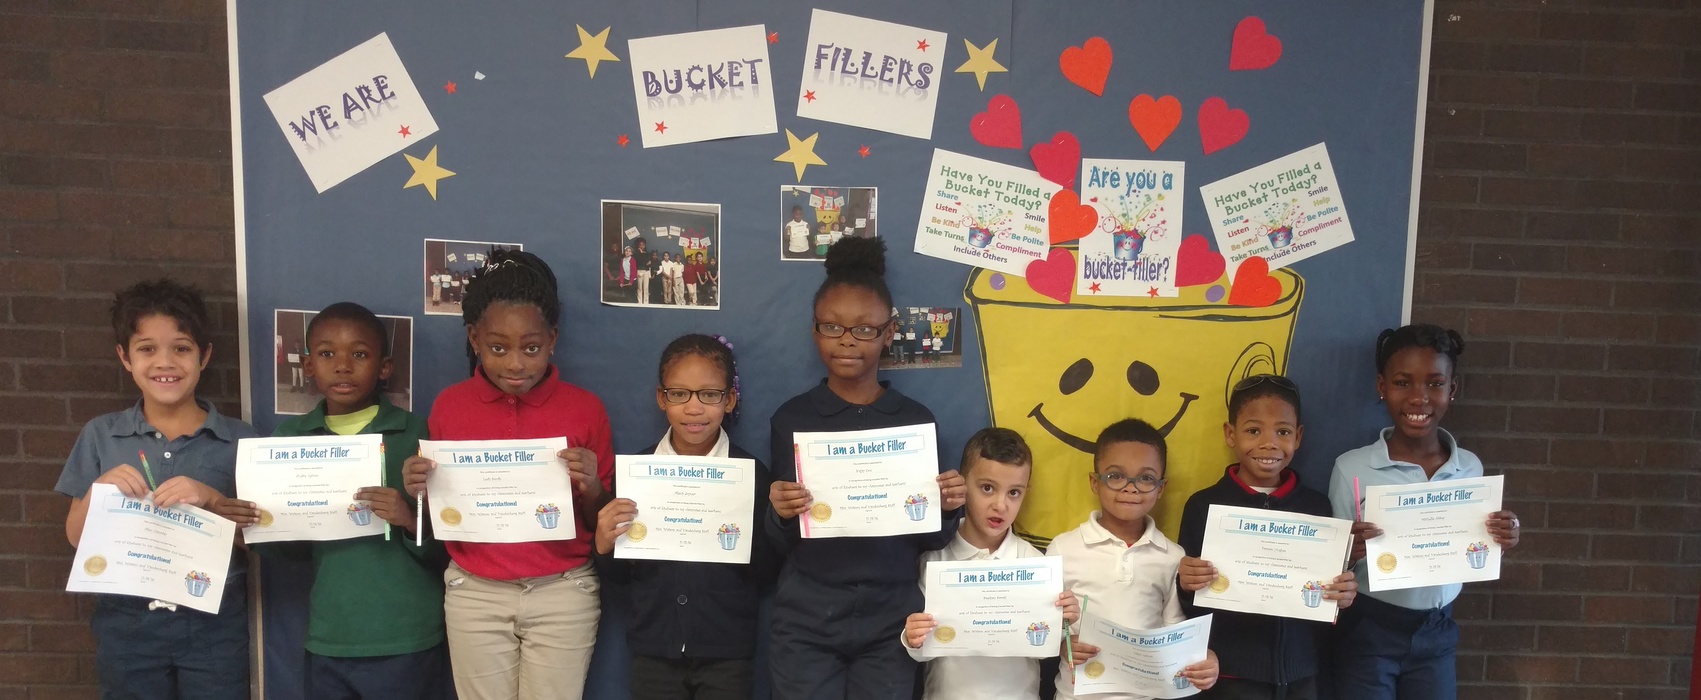 A Group of students that were Bucket Fillers